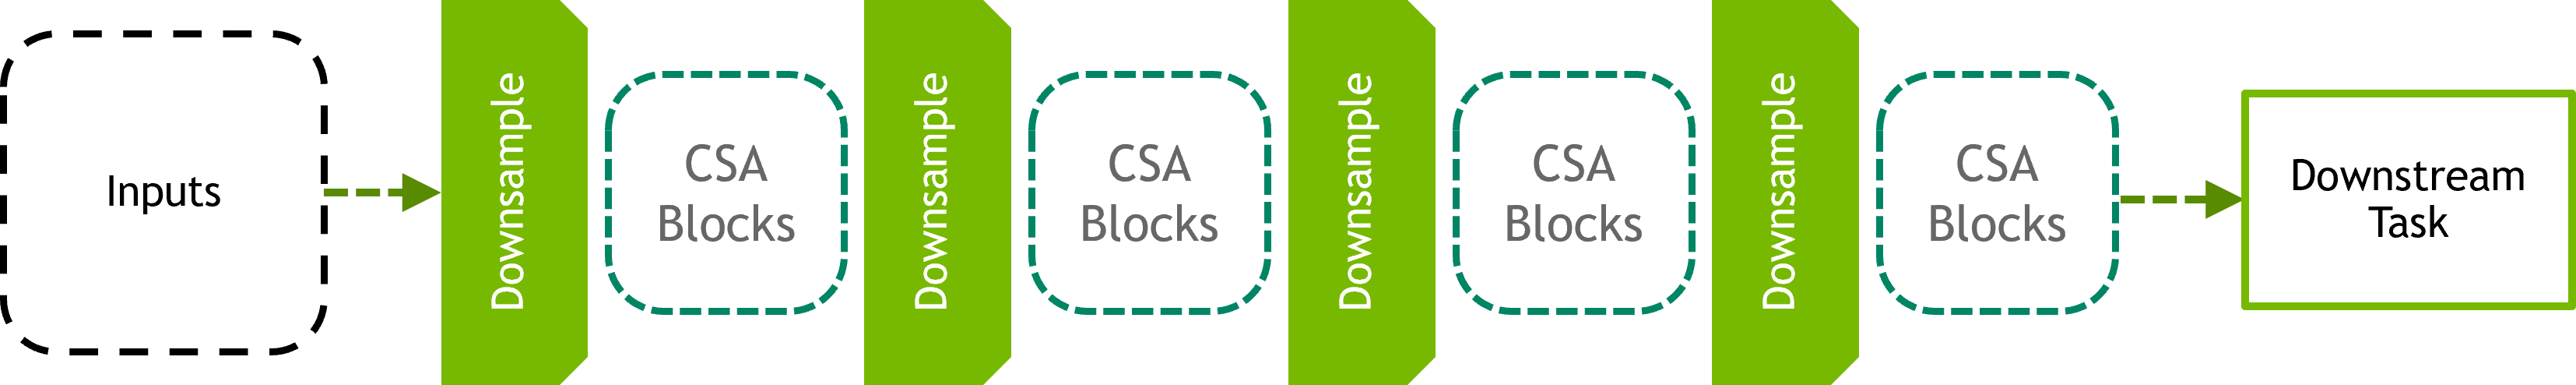 Illustration of the overall proposed model and our proposed CSA blocks along its feed-forwarding flow.